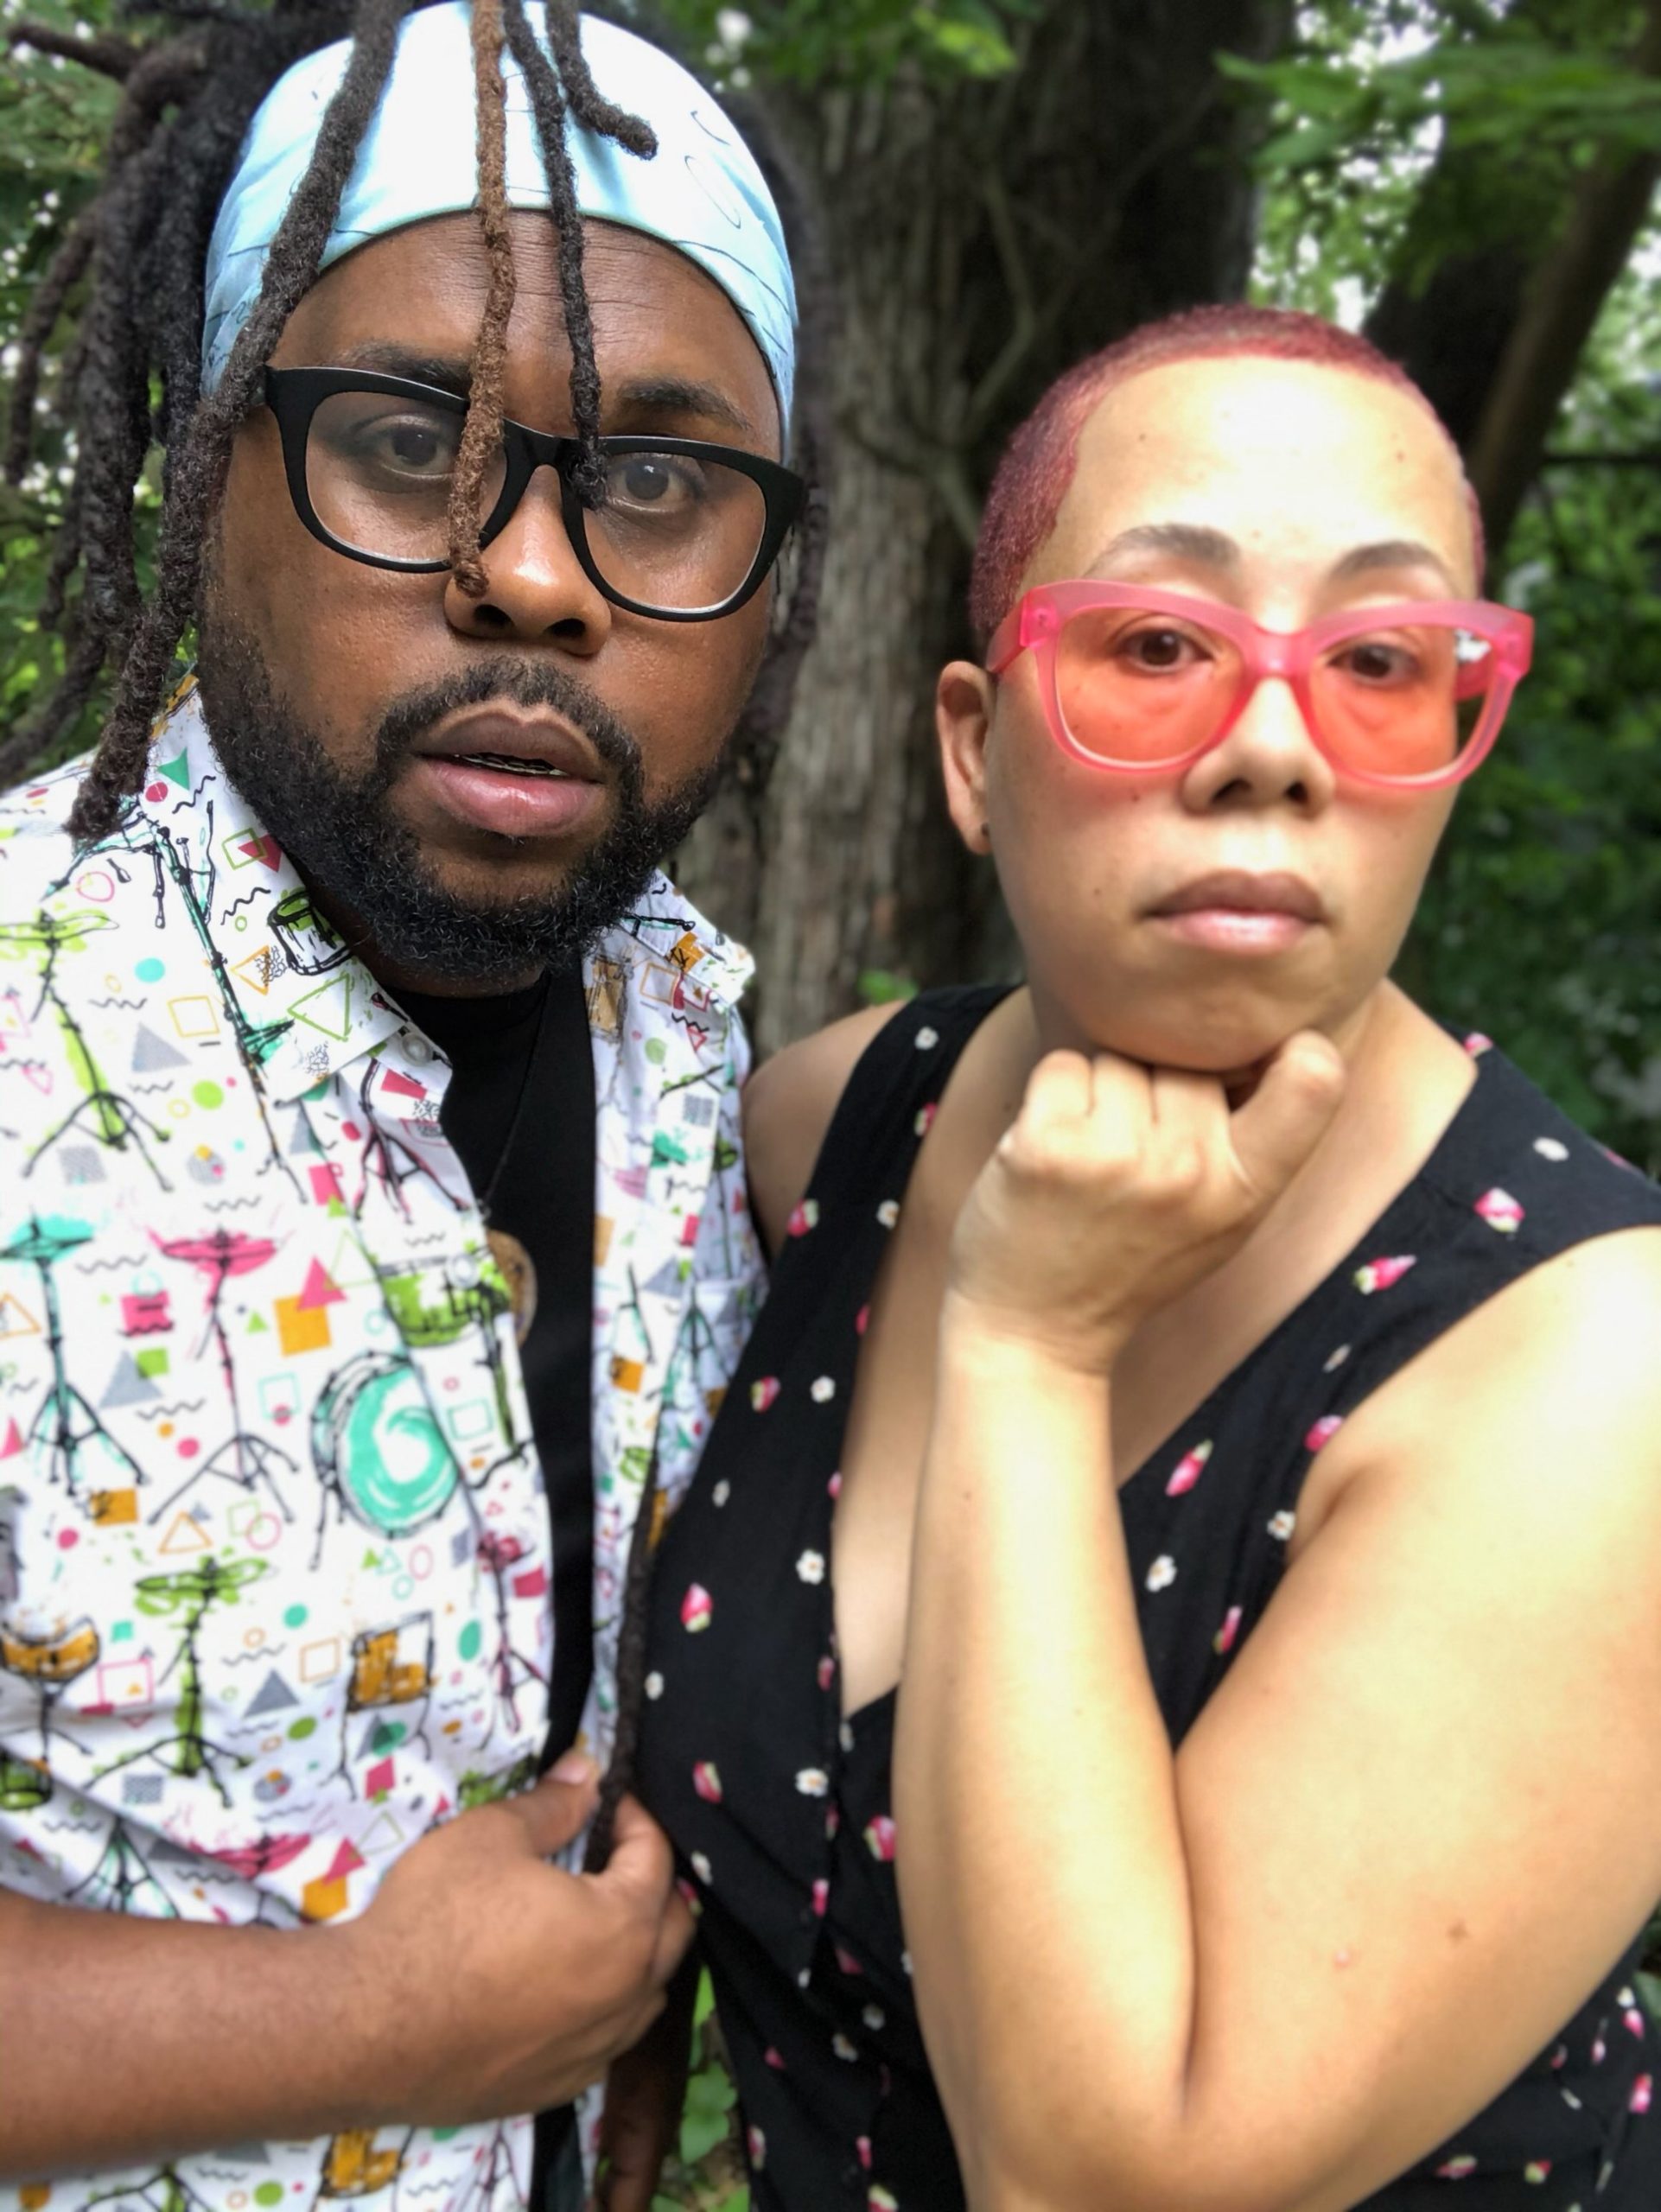 You are currently viewing Shareholder Spotlight: Jeremy “Wize” Brown, his partner Sultra and their three children honor Mother Earth by eating plants and making Hip Hop music.